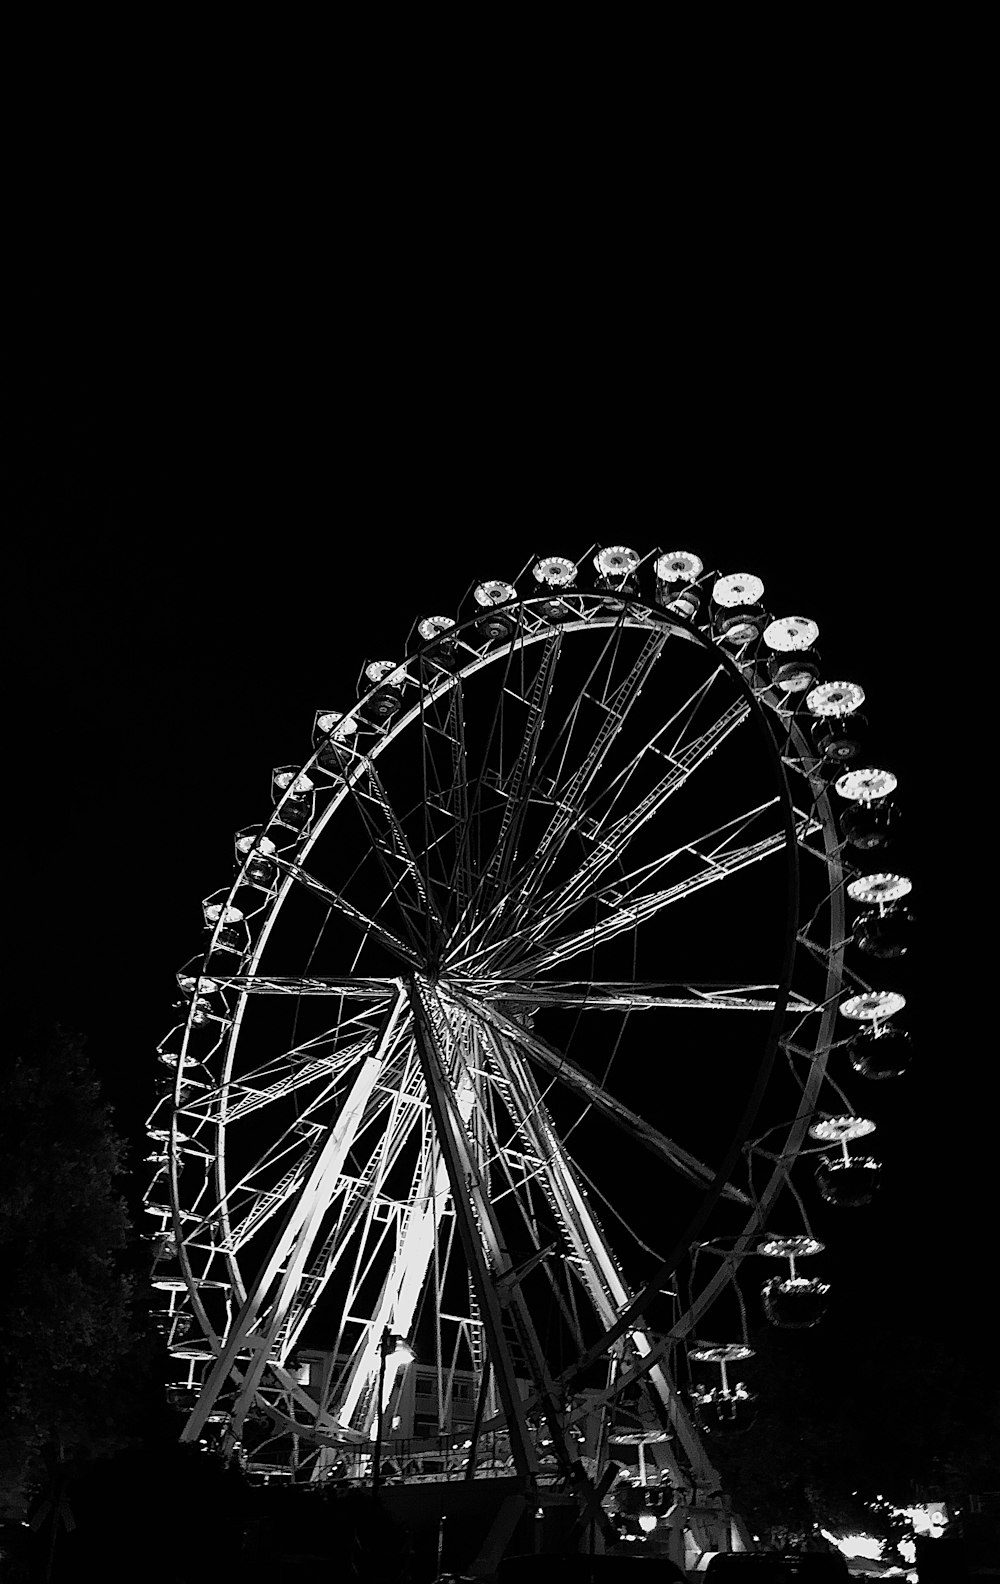 big fairy's wheel during nighttime with lights